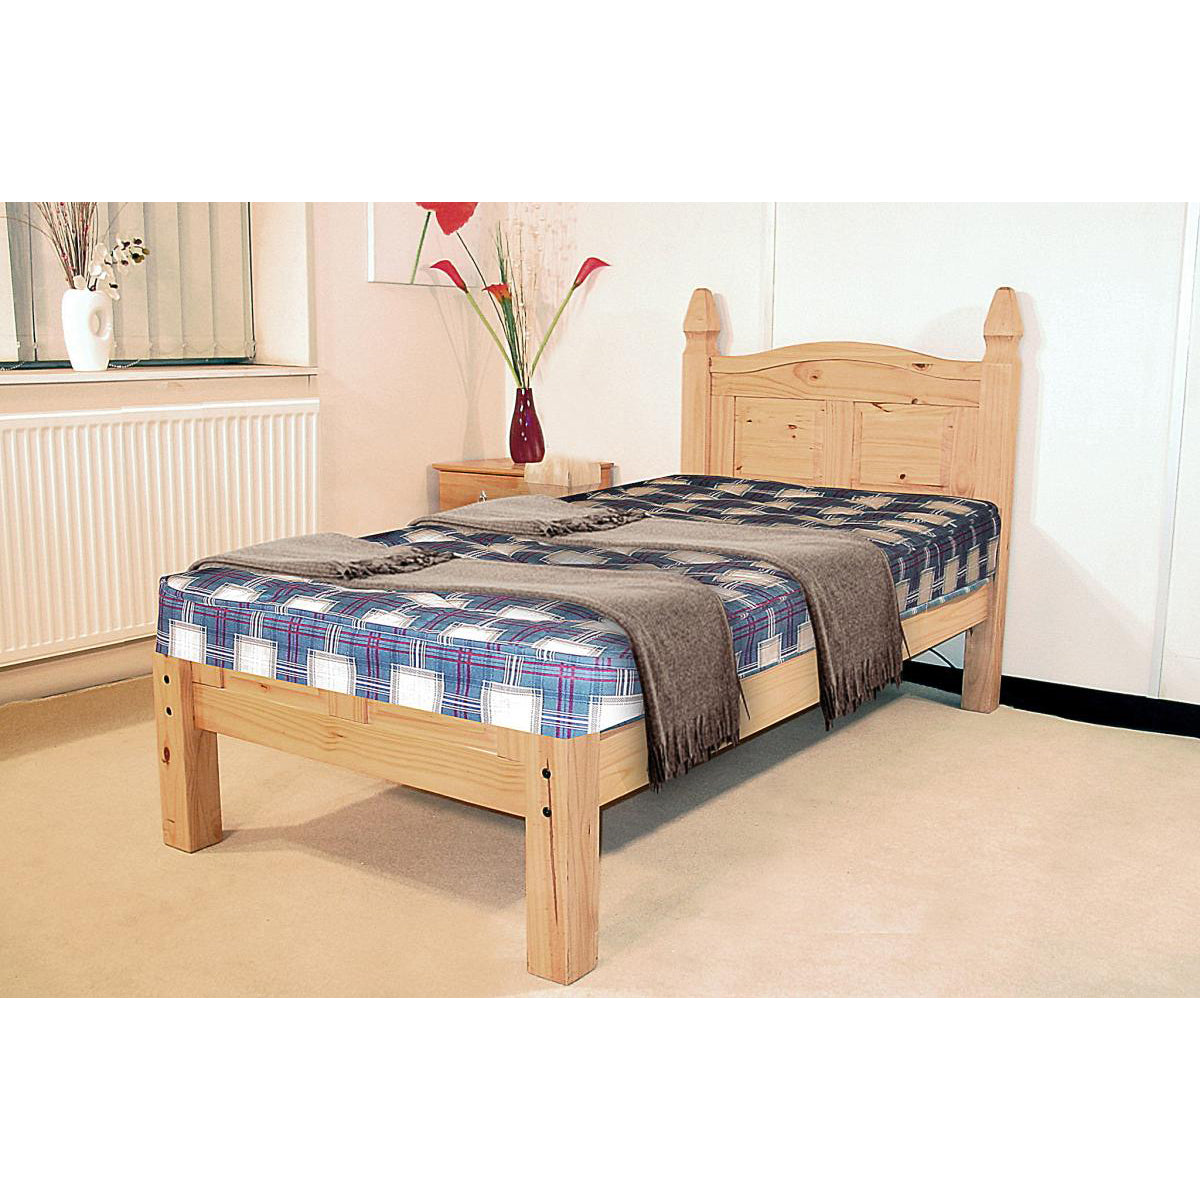 Corona Bed King Size Low Foot End